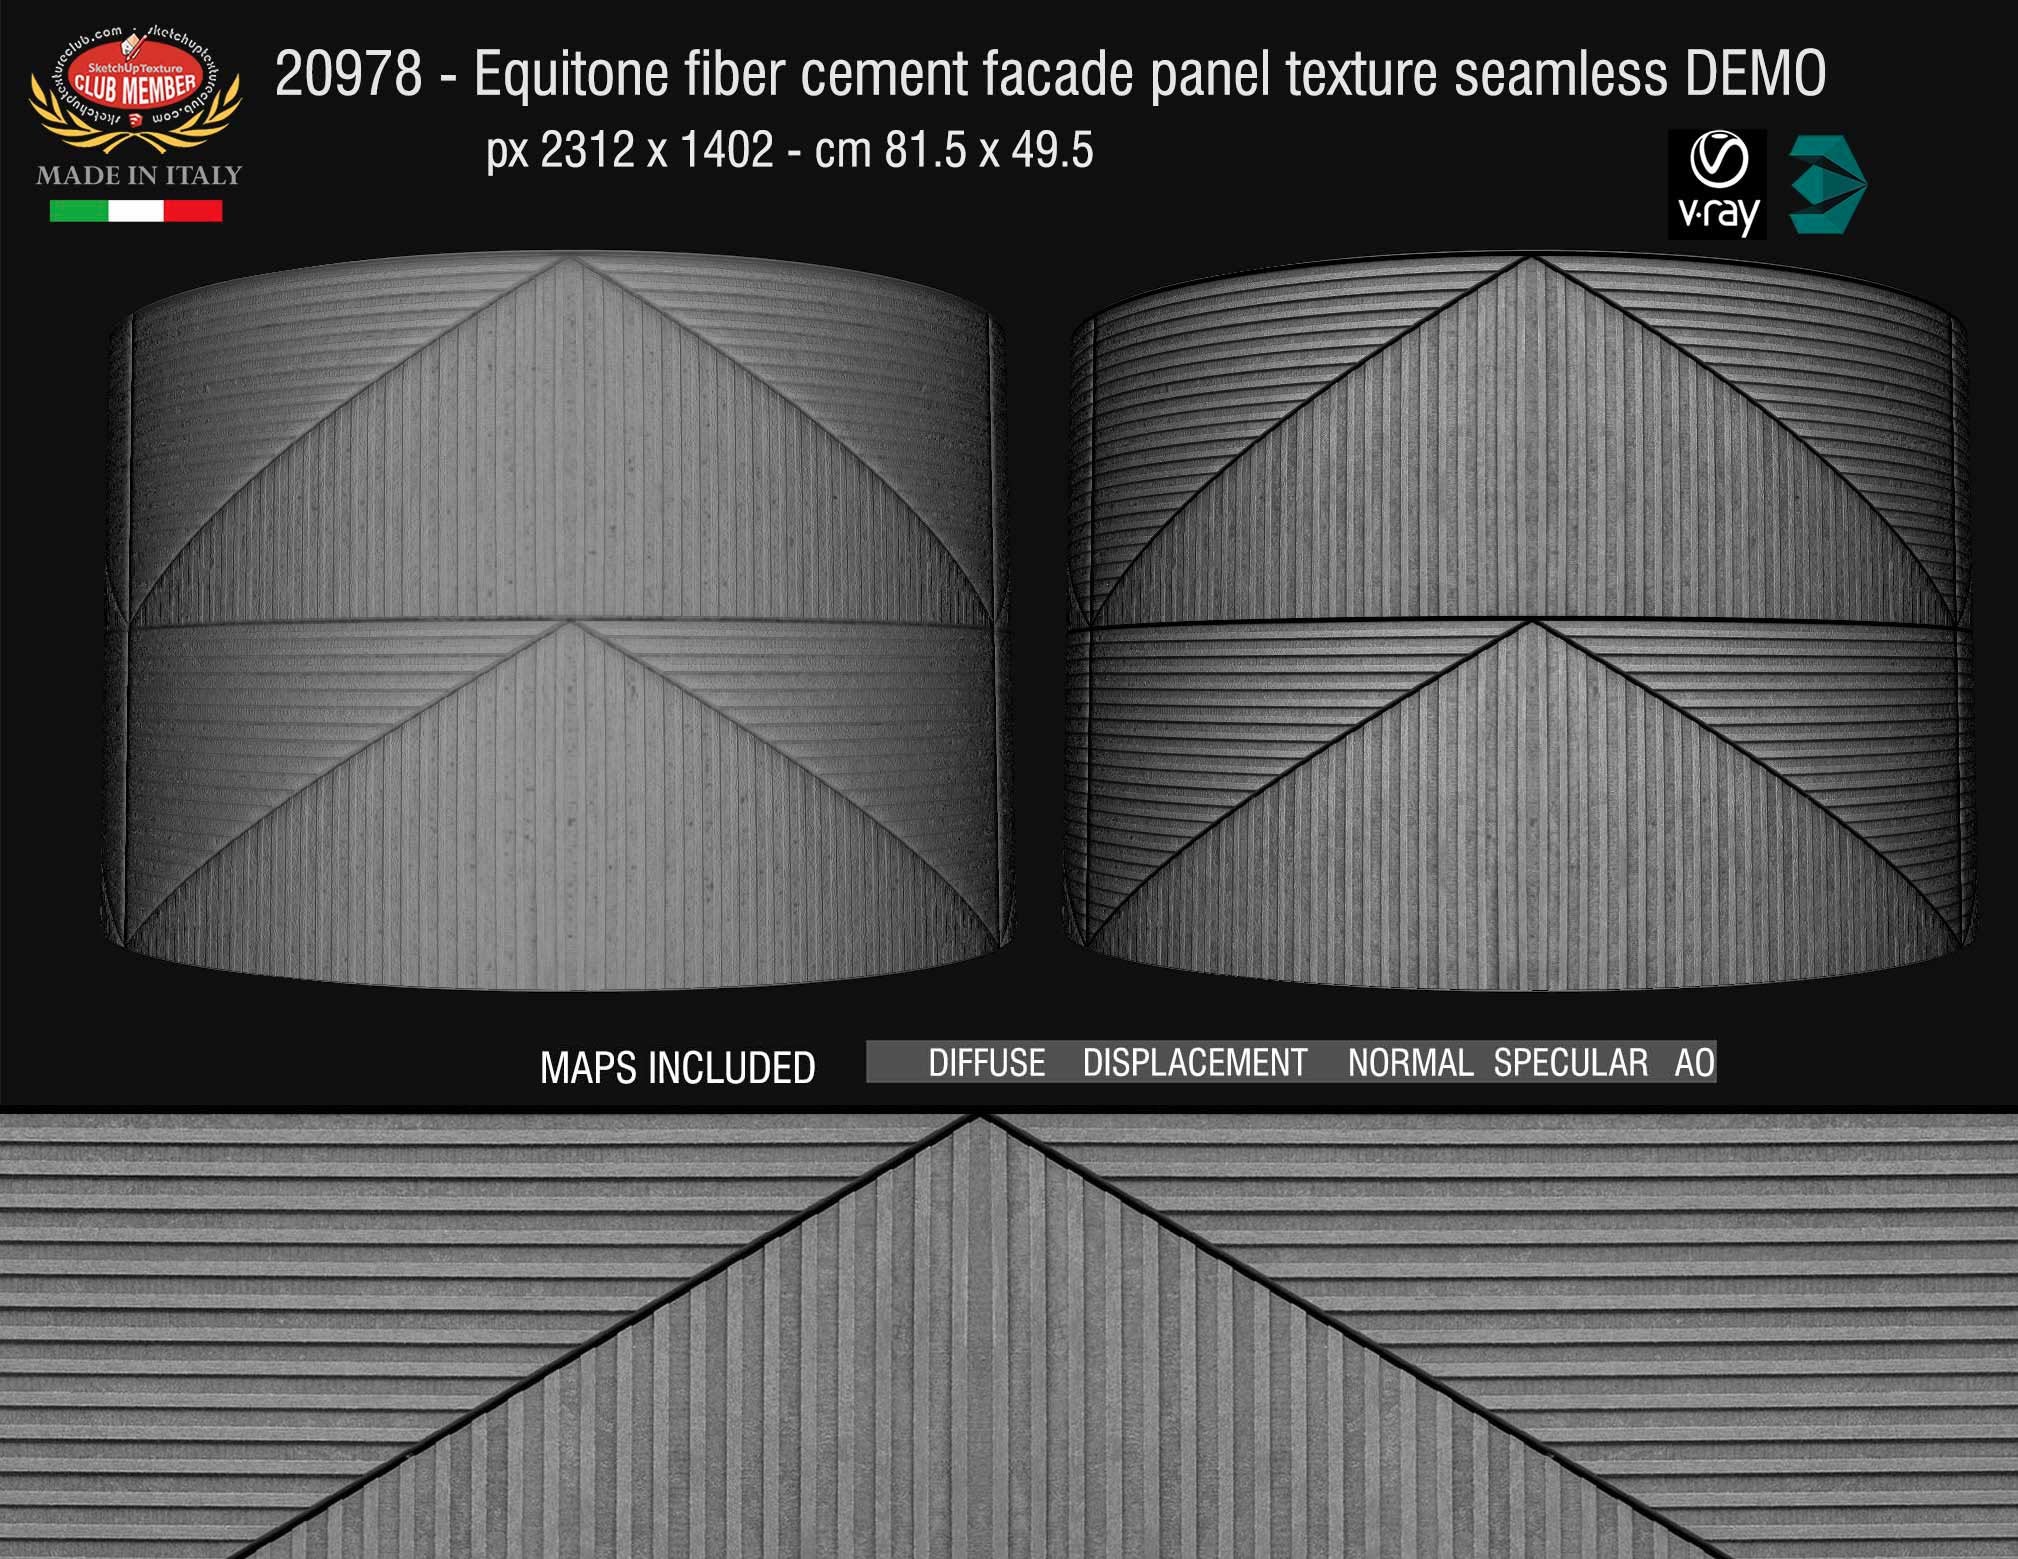 CLICK TO ENLARGE Equitone fiber cement facade panel texture + maps DEMO